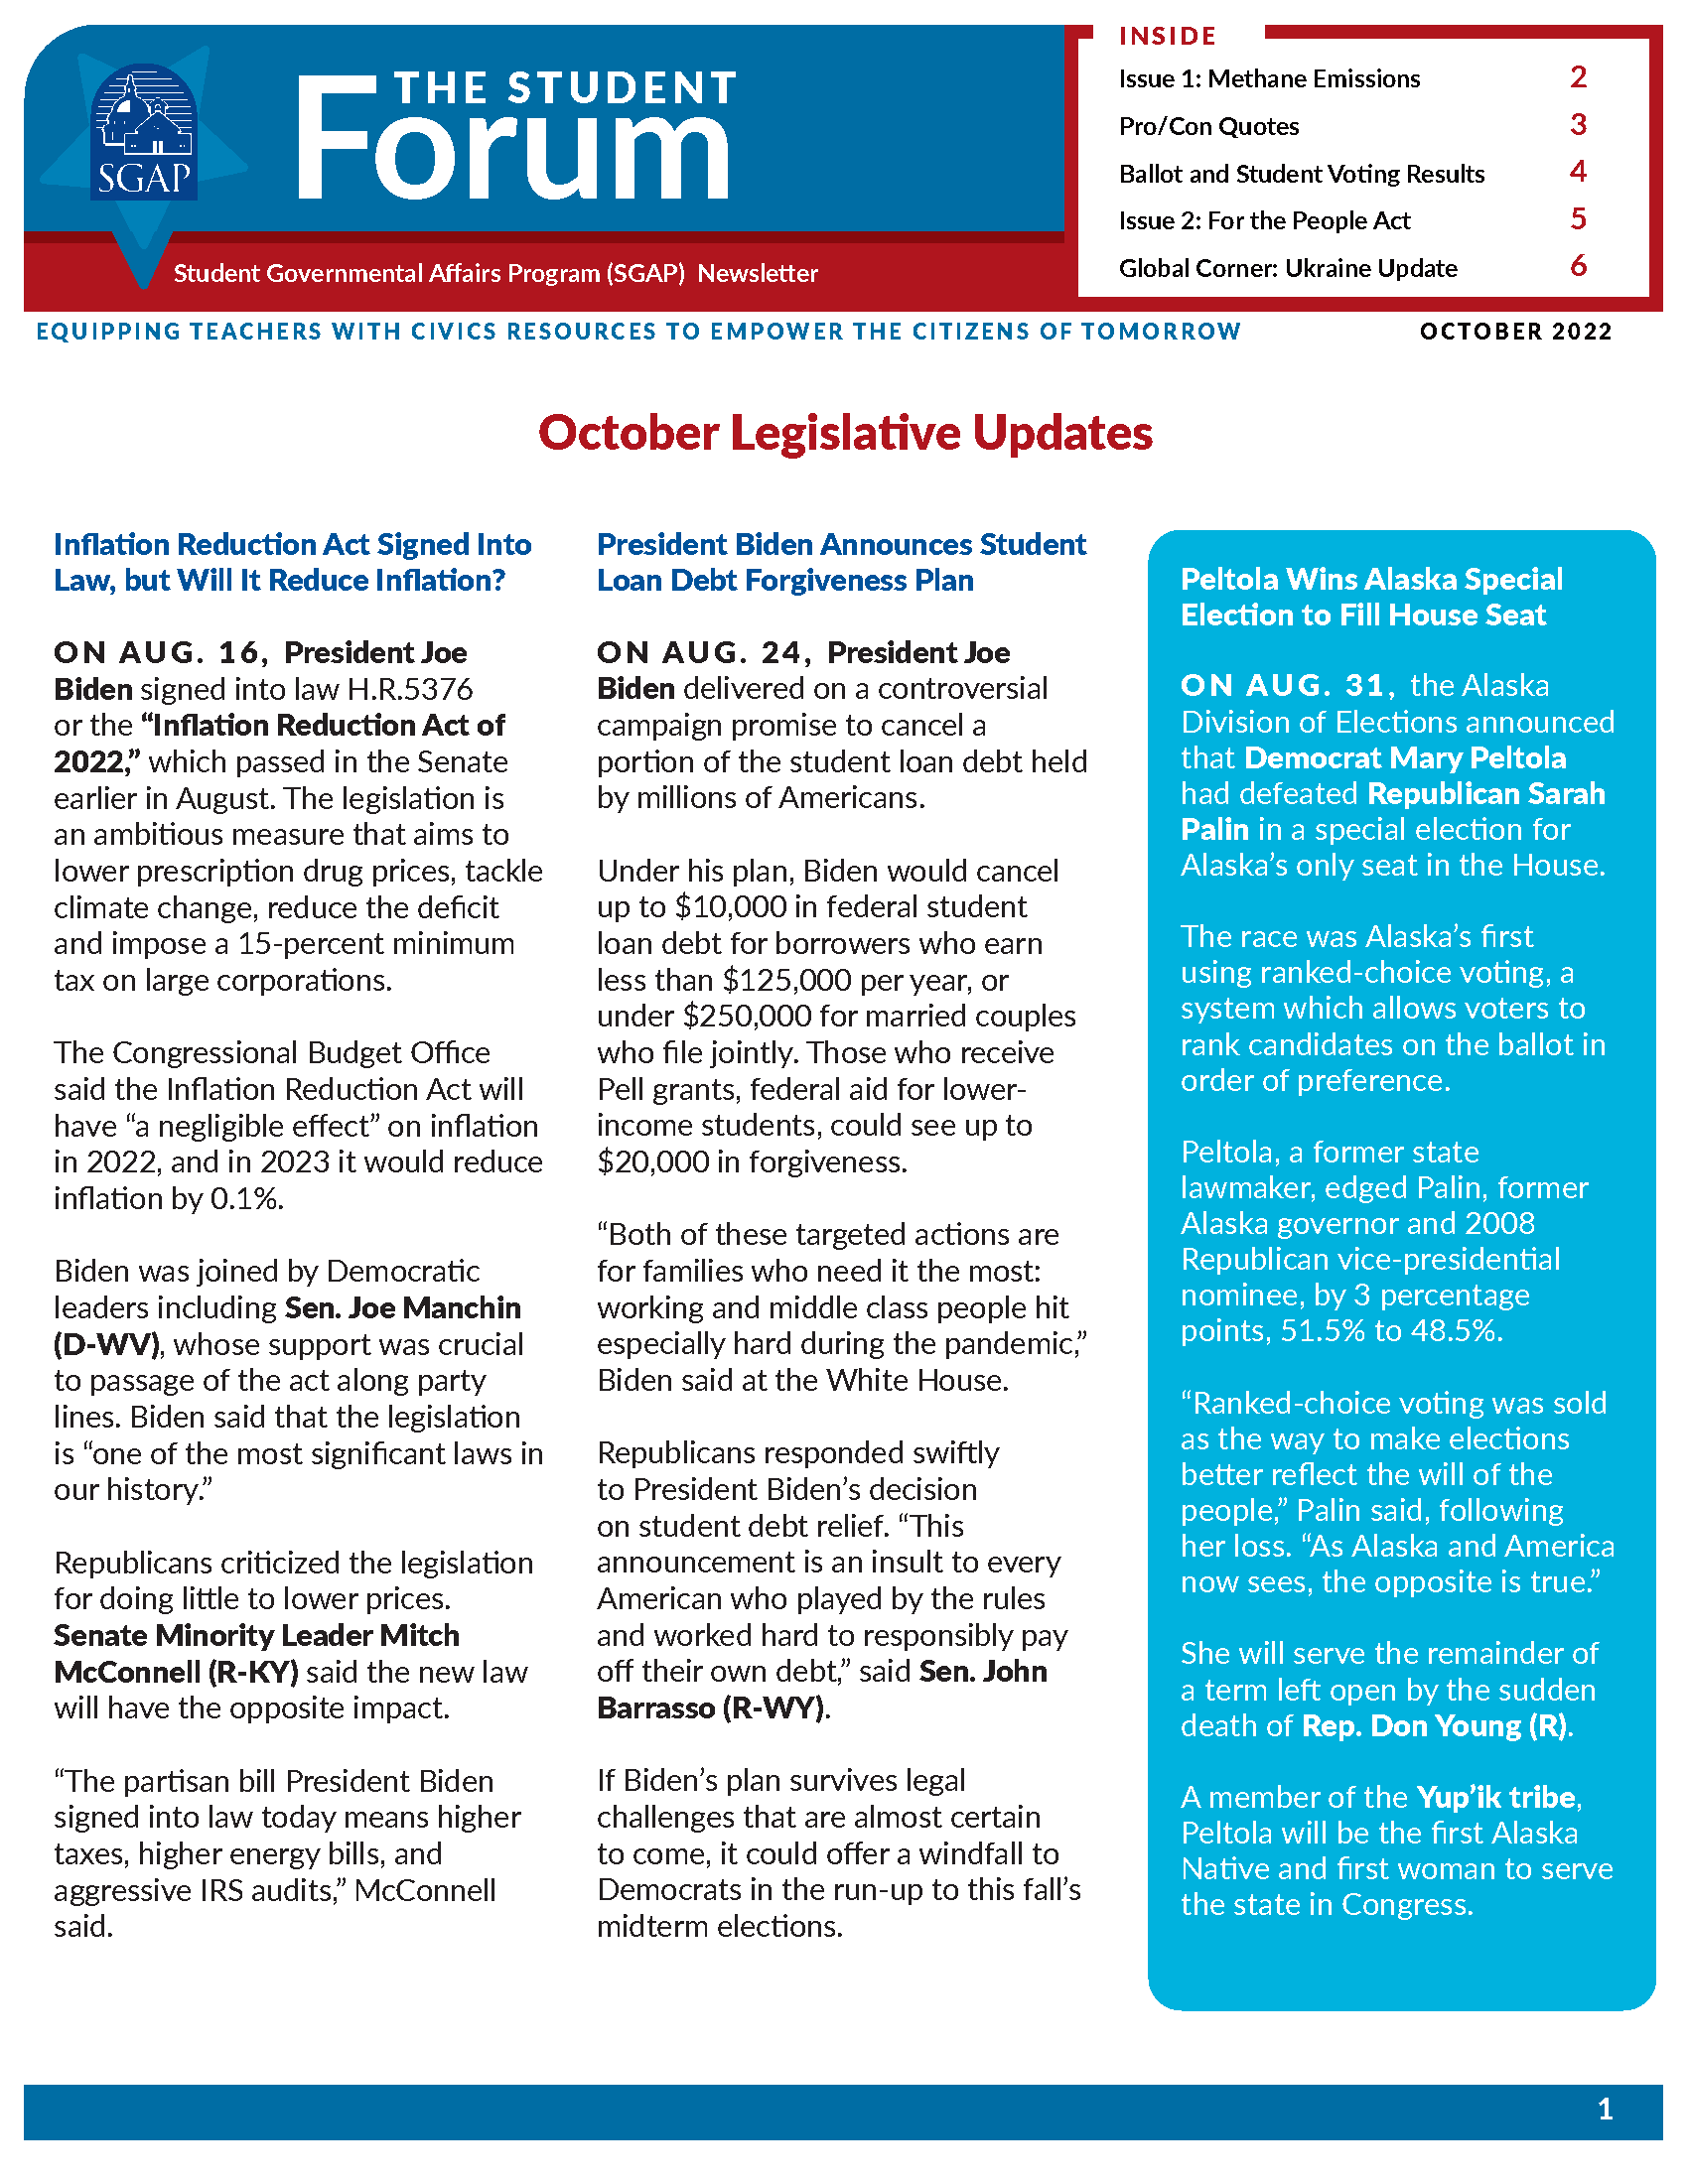 SGAP Newsletter for October 2022 (Methane Emissions + For the People Act)